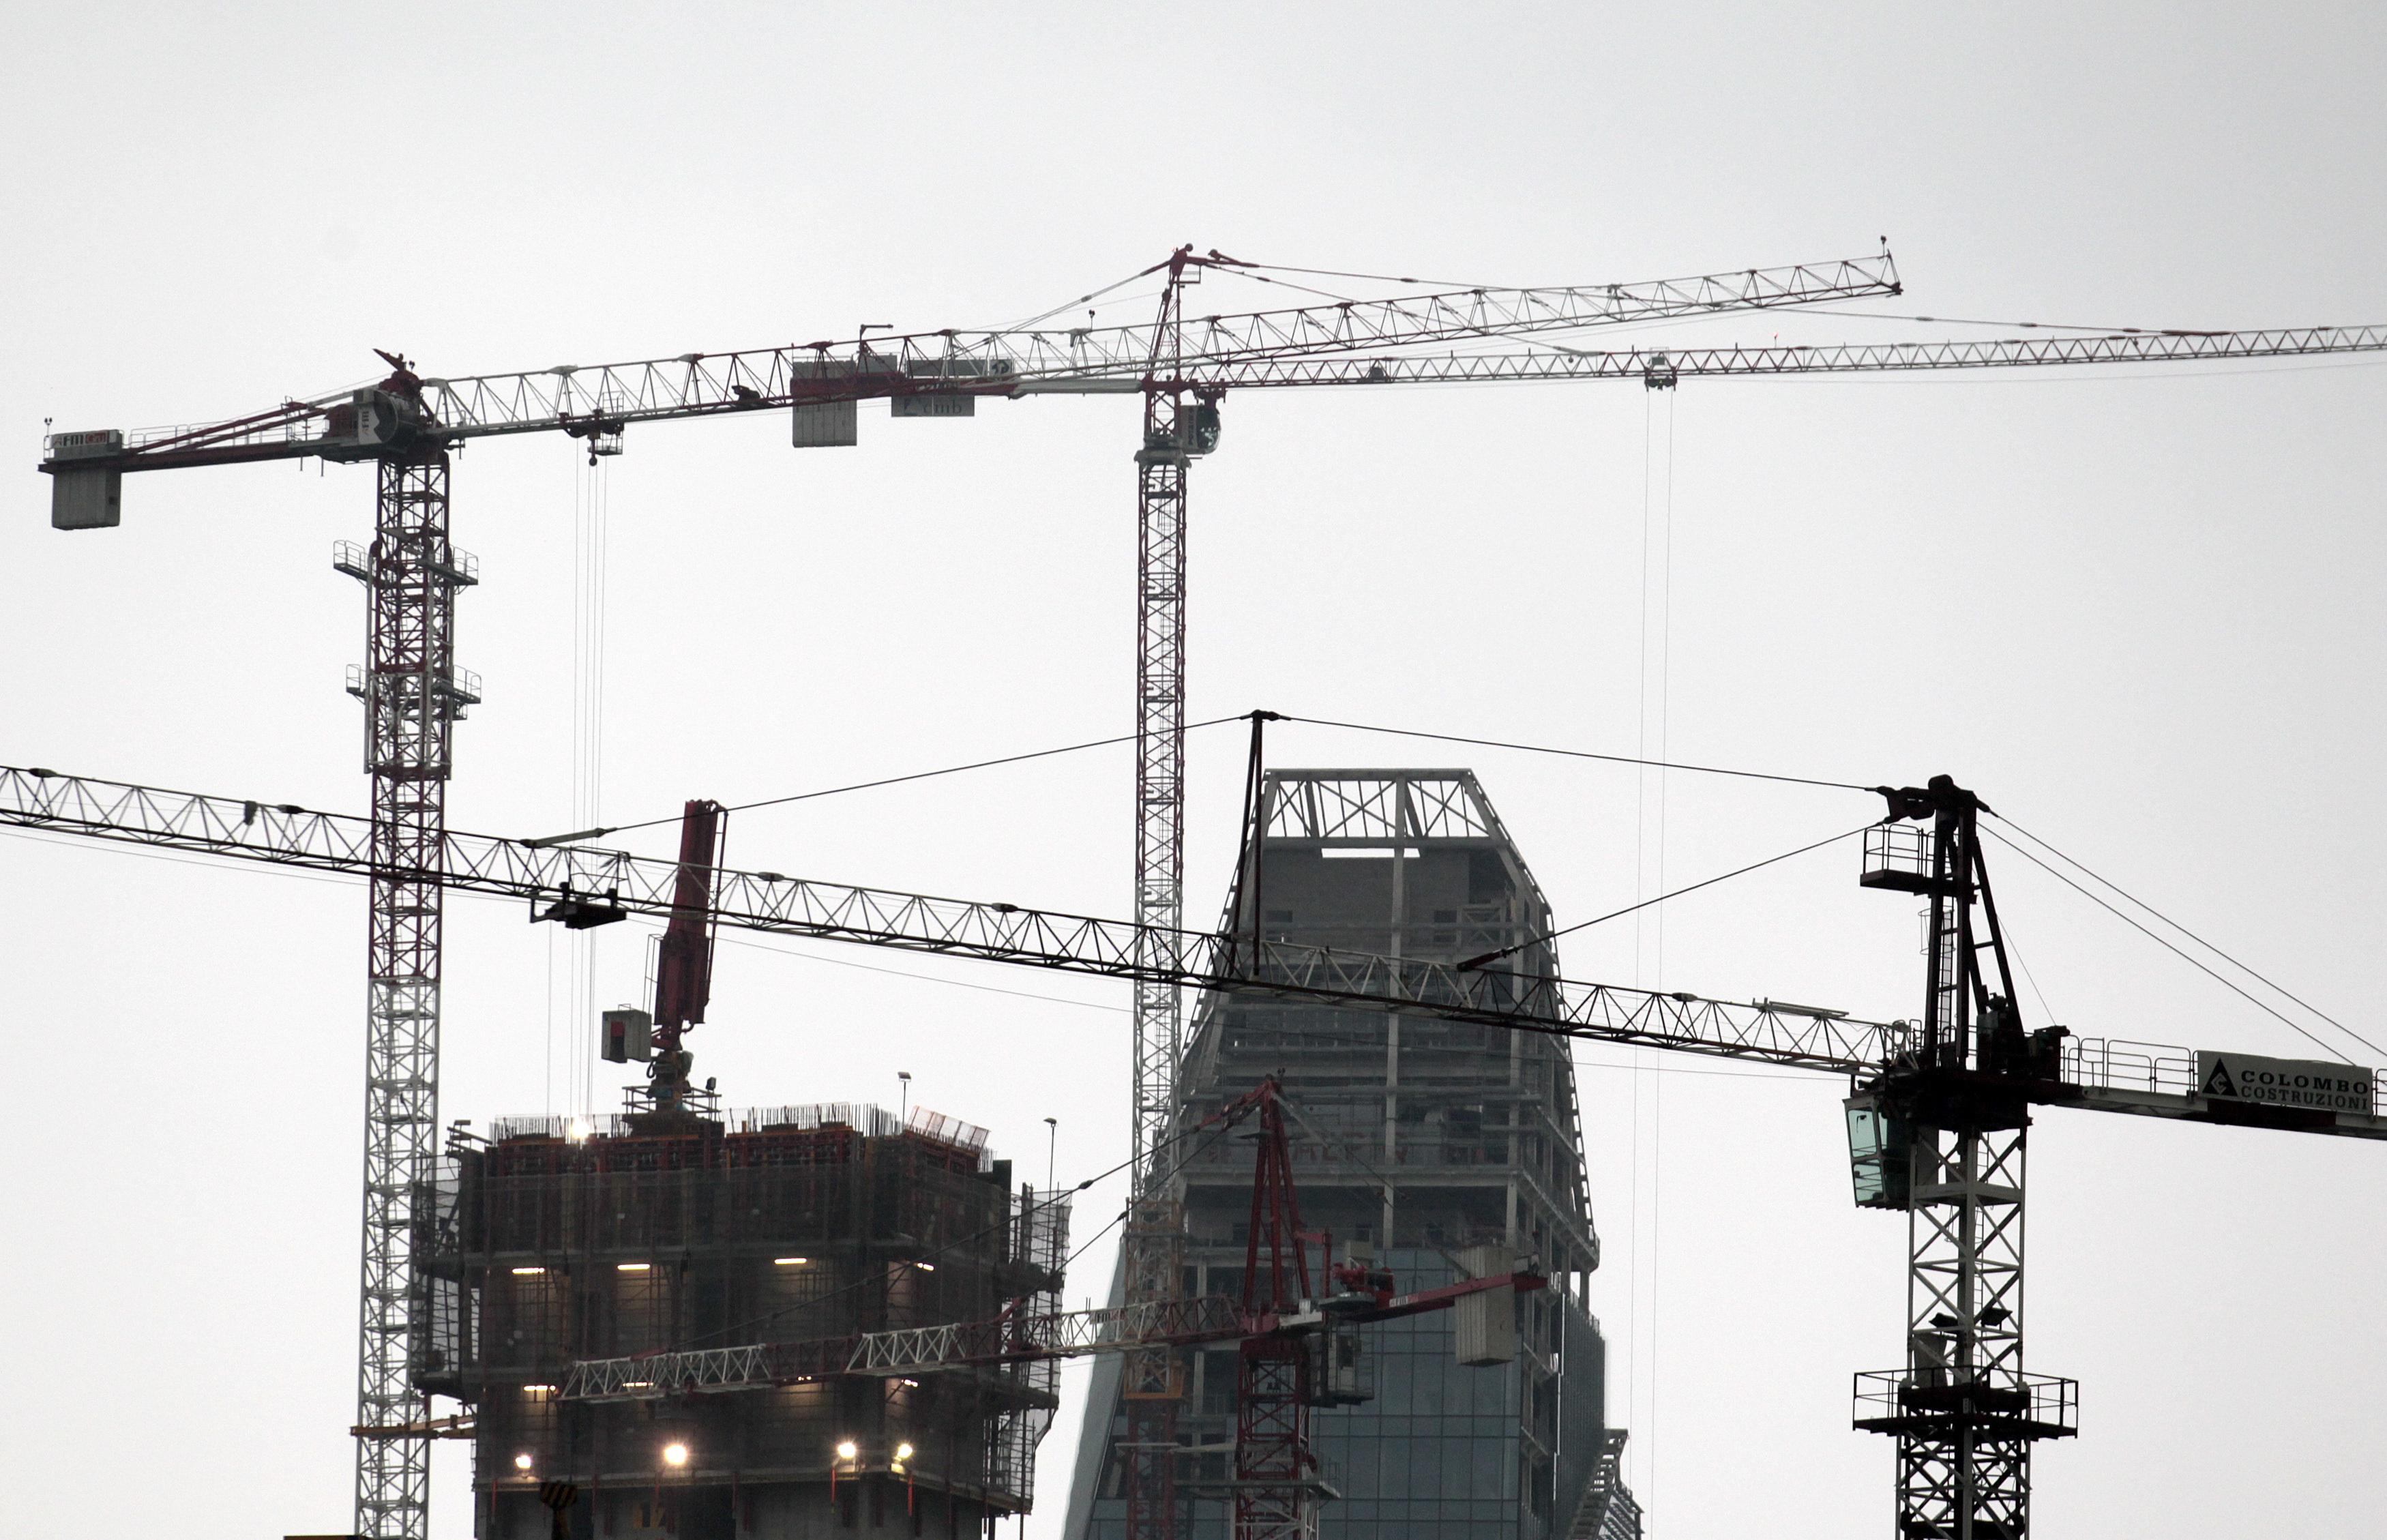 New buildings under construction are seen in Milan